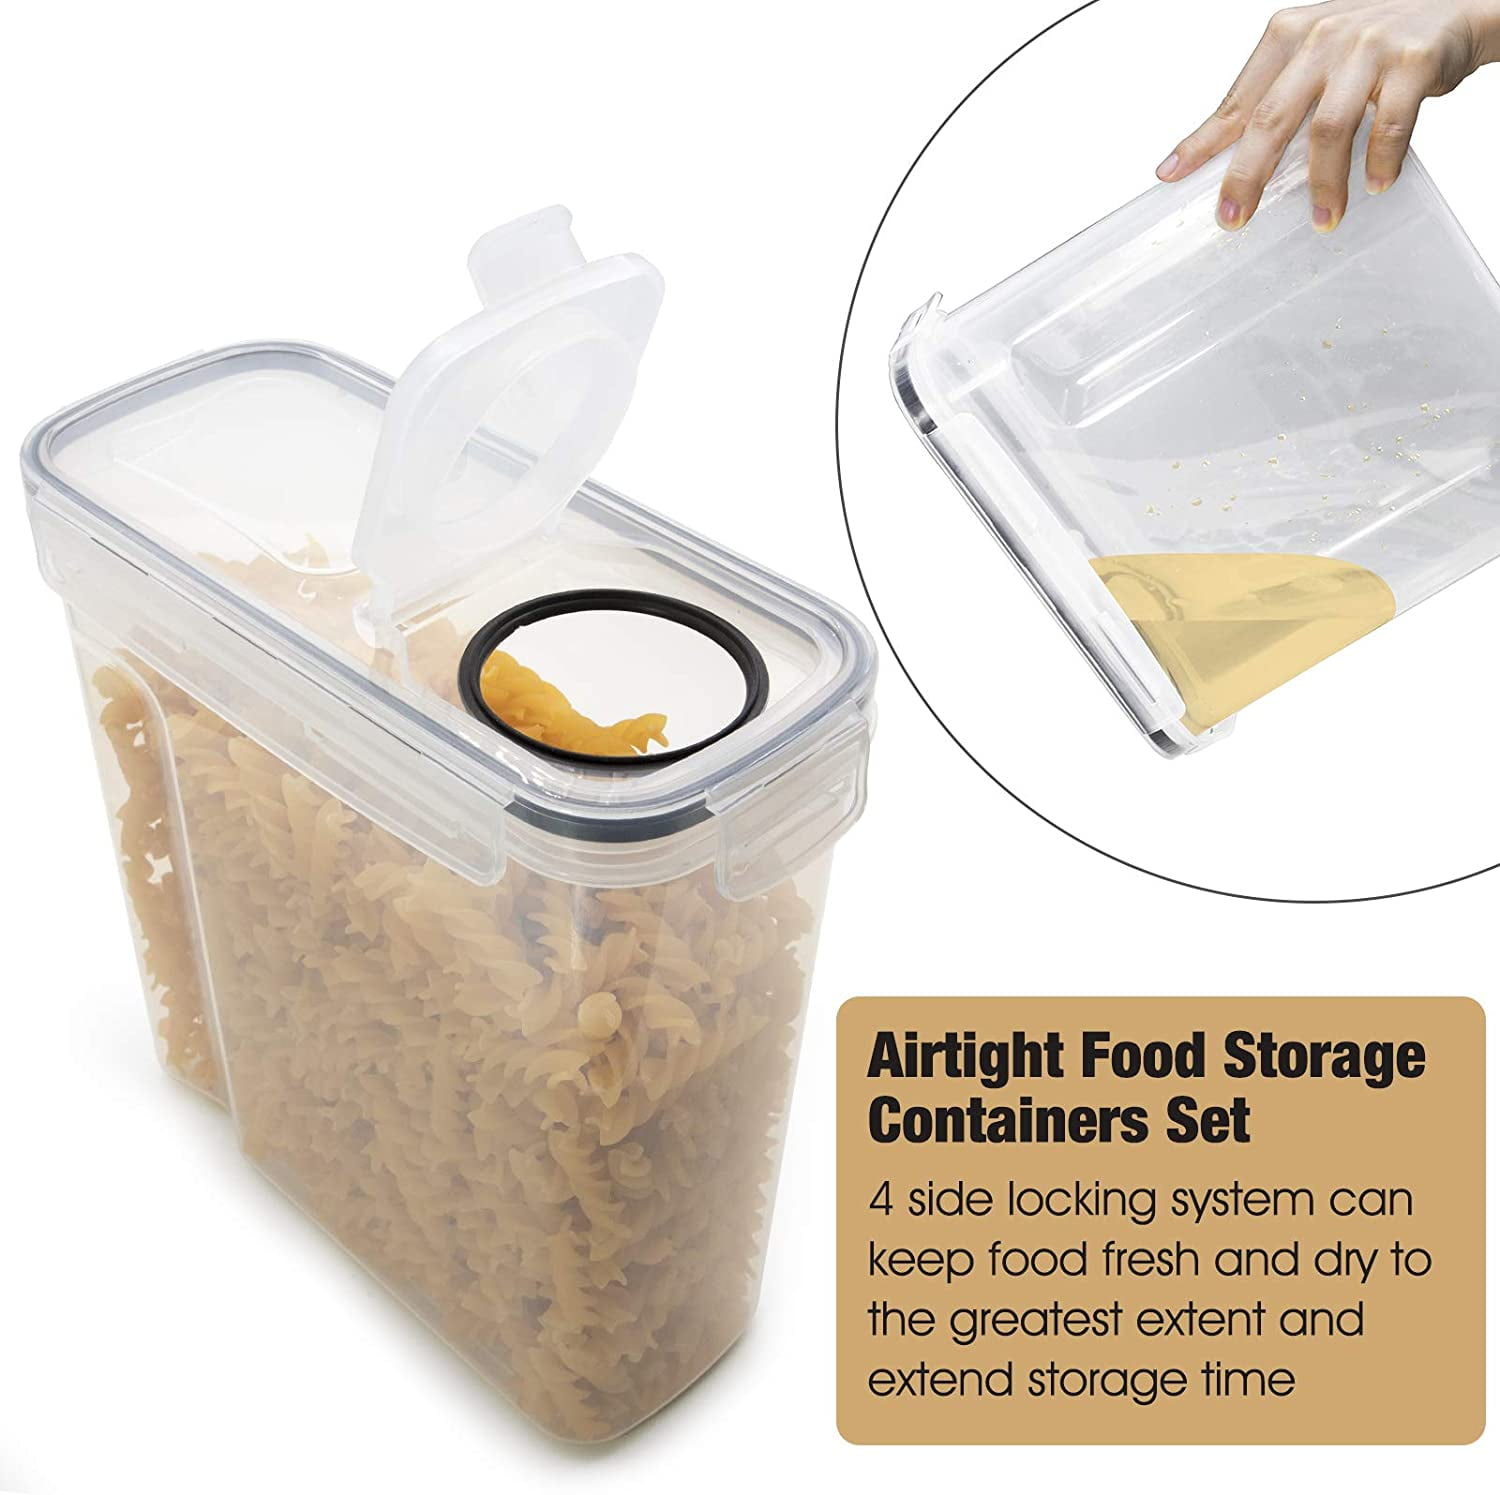 Universal CL-4L - Food Storage Container Square Clear 4 L